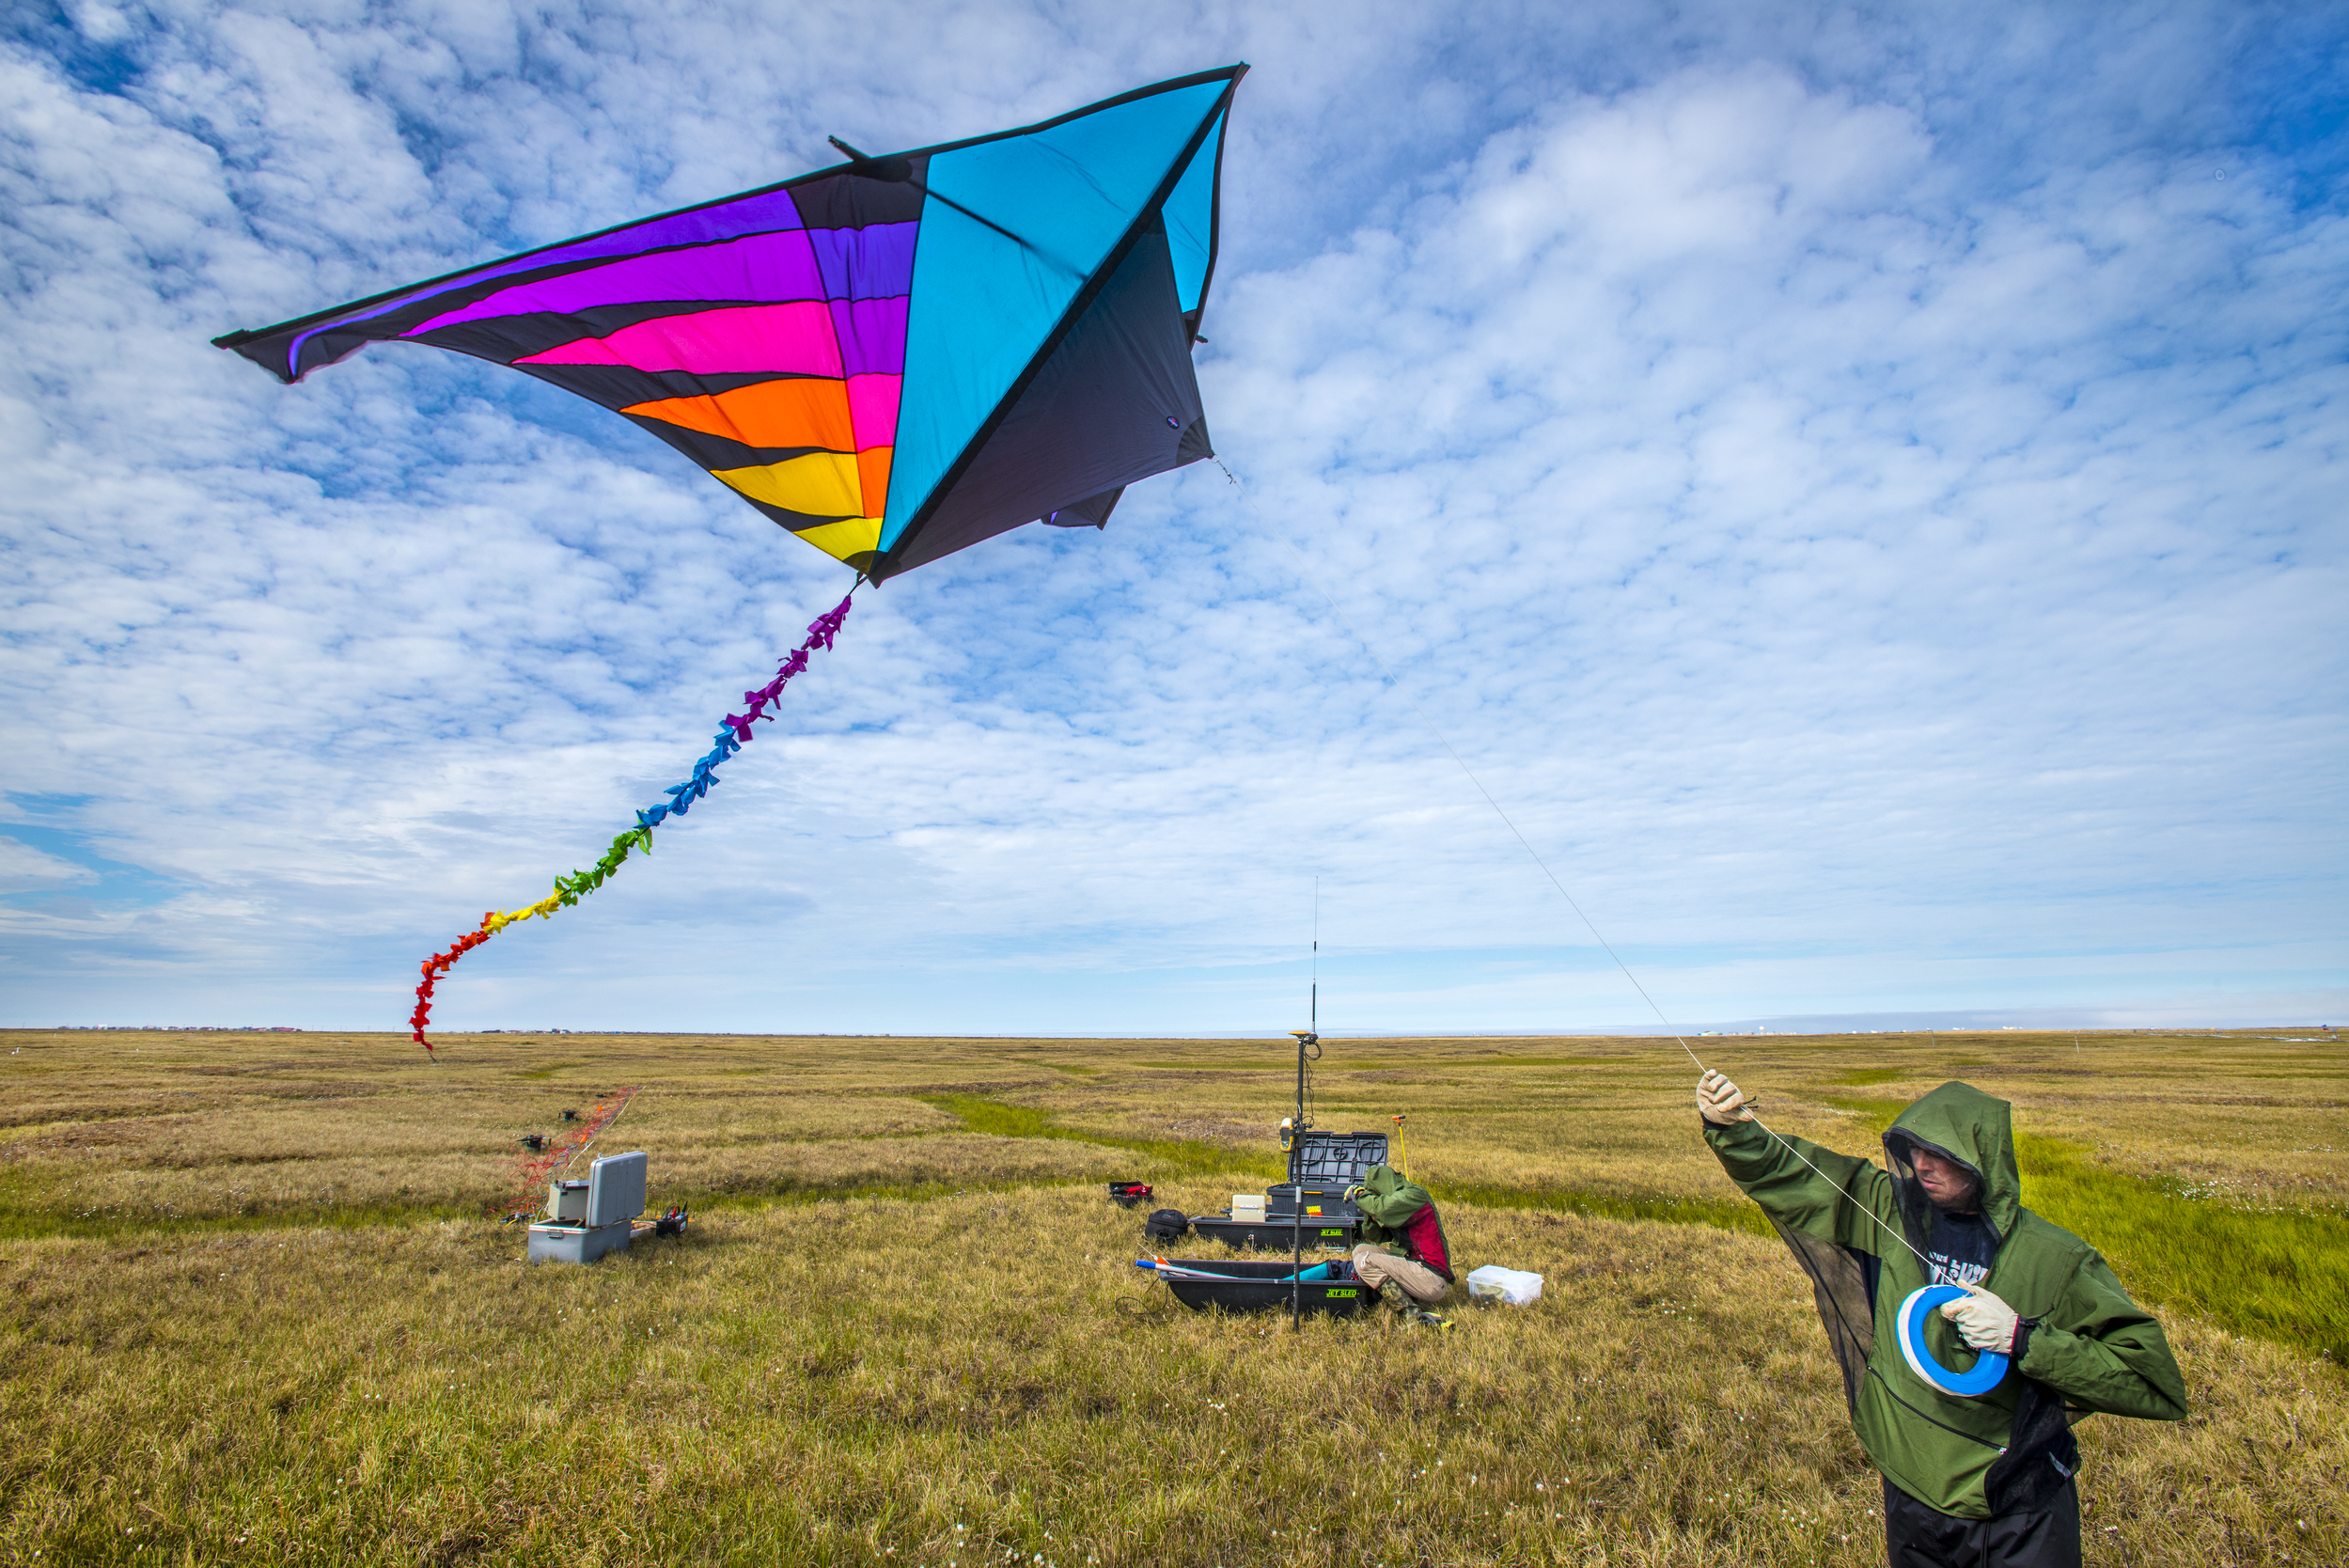 Craig Ulrich collecting imagery of the land surface using sensors mounted on a kite.